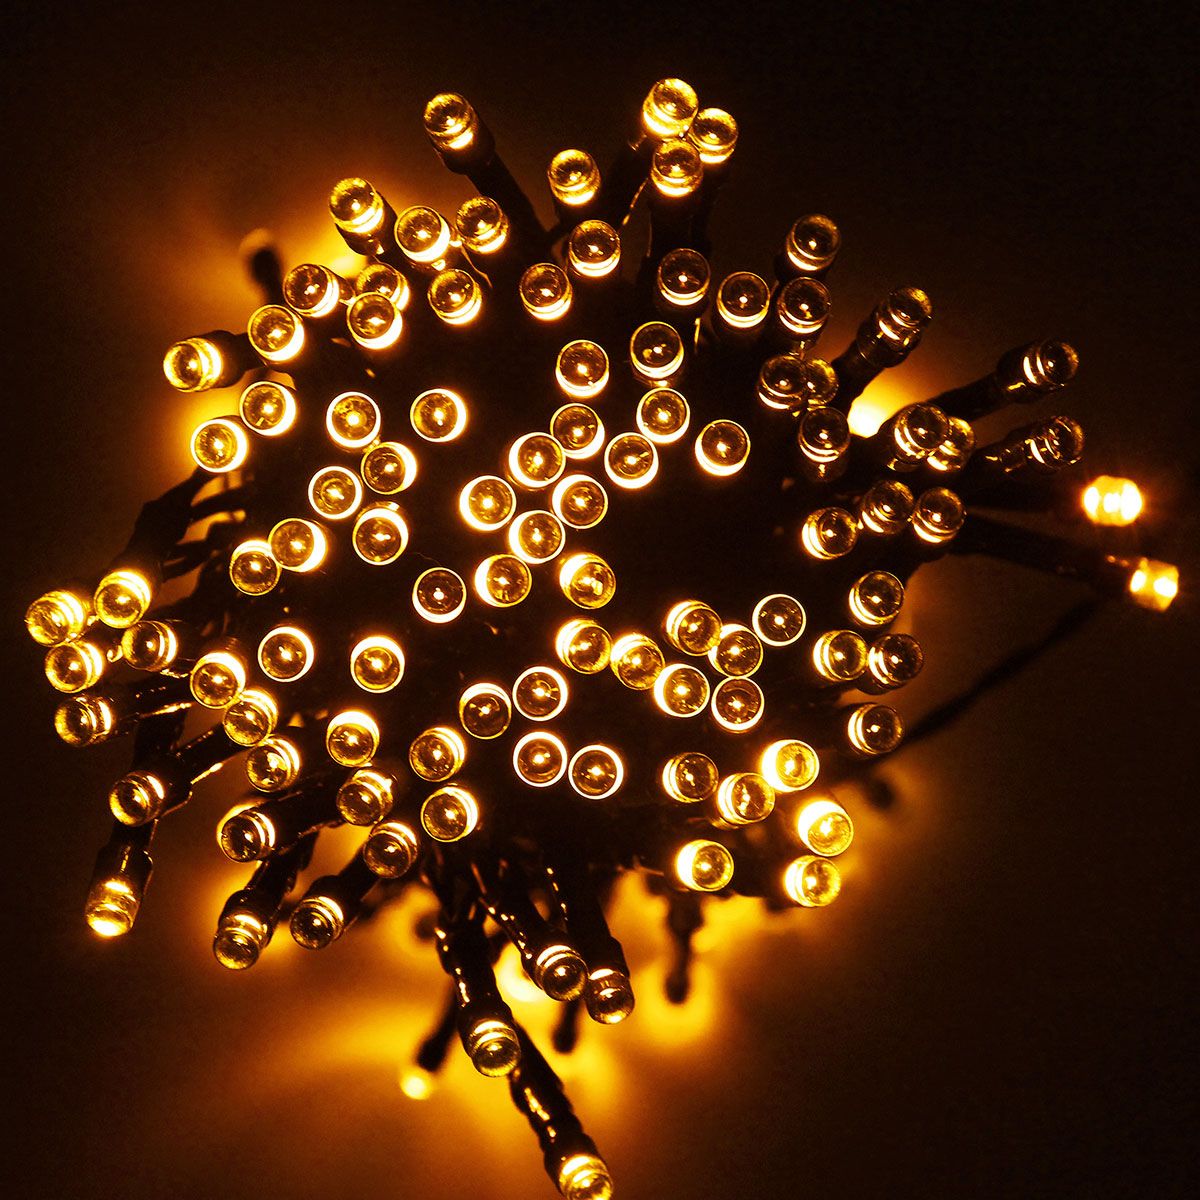 22M-Solar-Powered-200LED-Fairy-Holiady-String-Light-Outdoor-Wedding-Christmas-Room-Party-Lamp-1339967